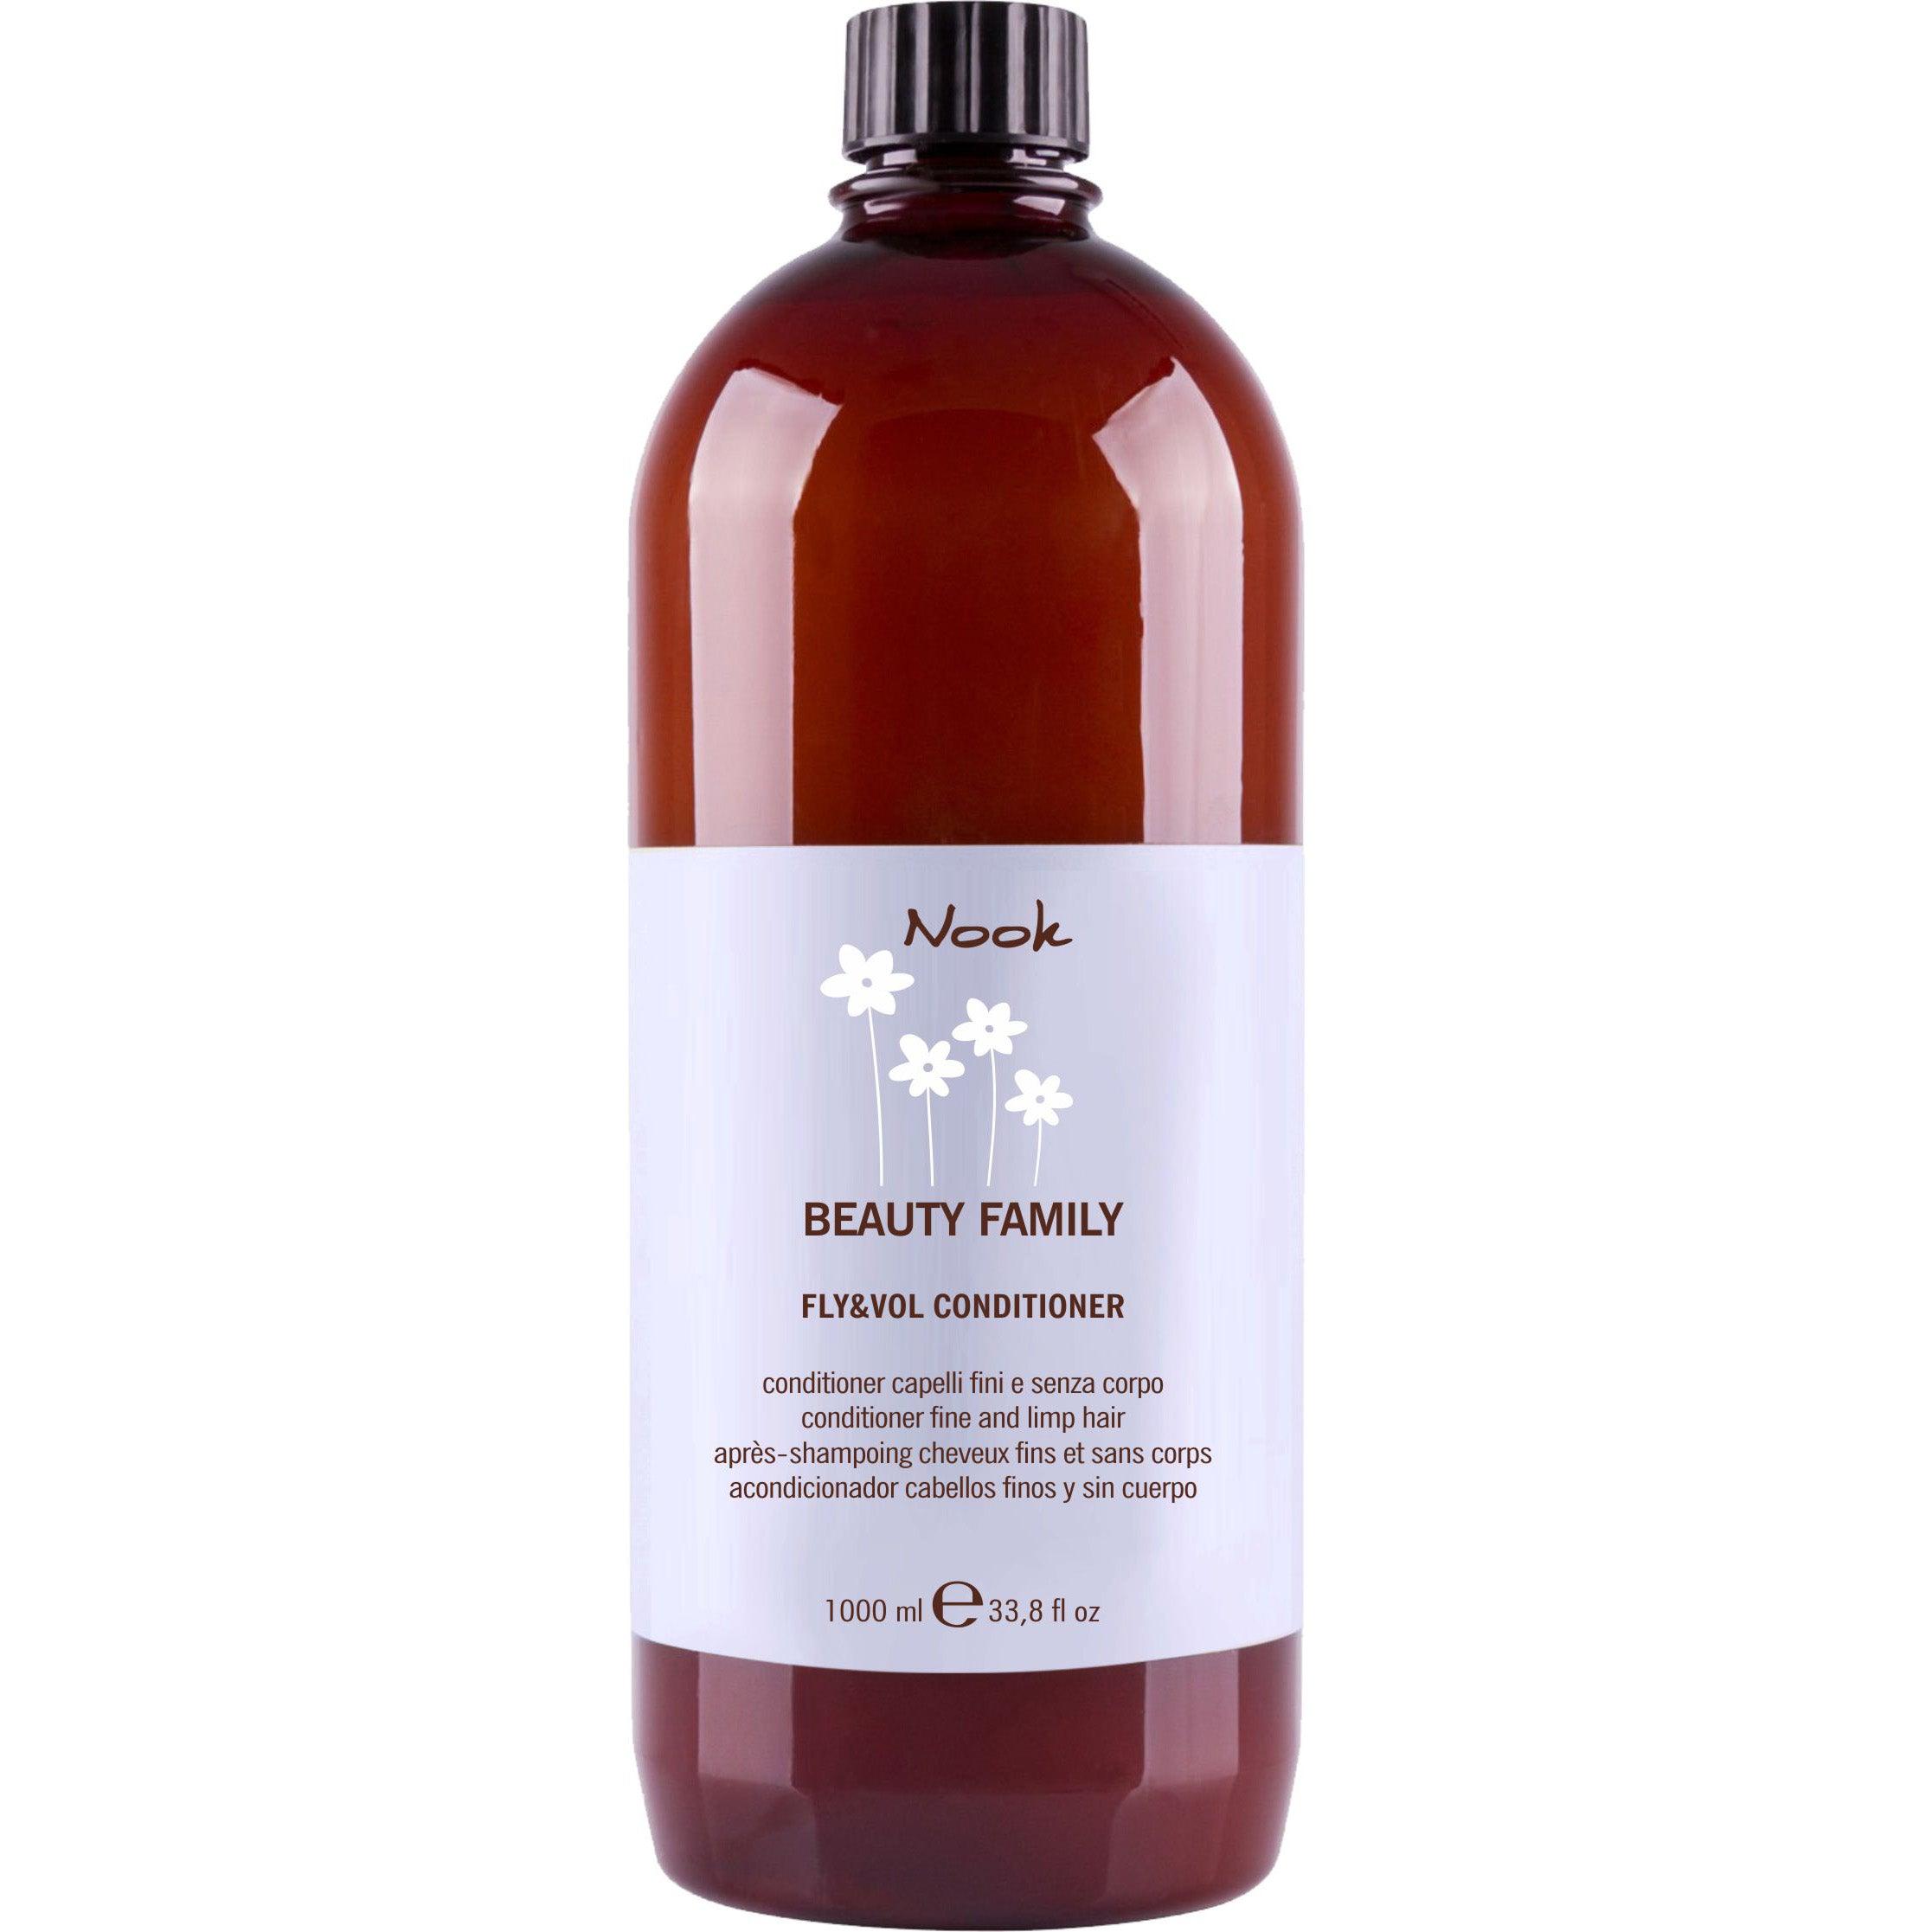 Nook Beauty Family Fly & Vol Conditioner 1000ml - Nook